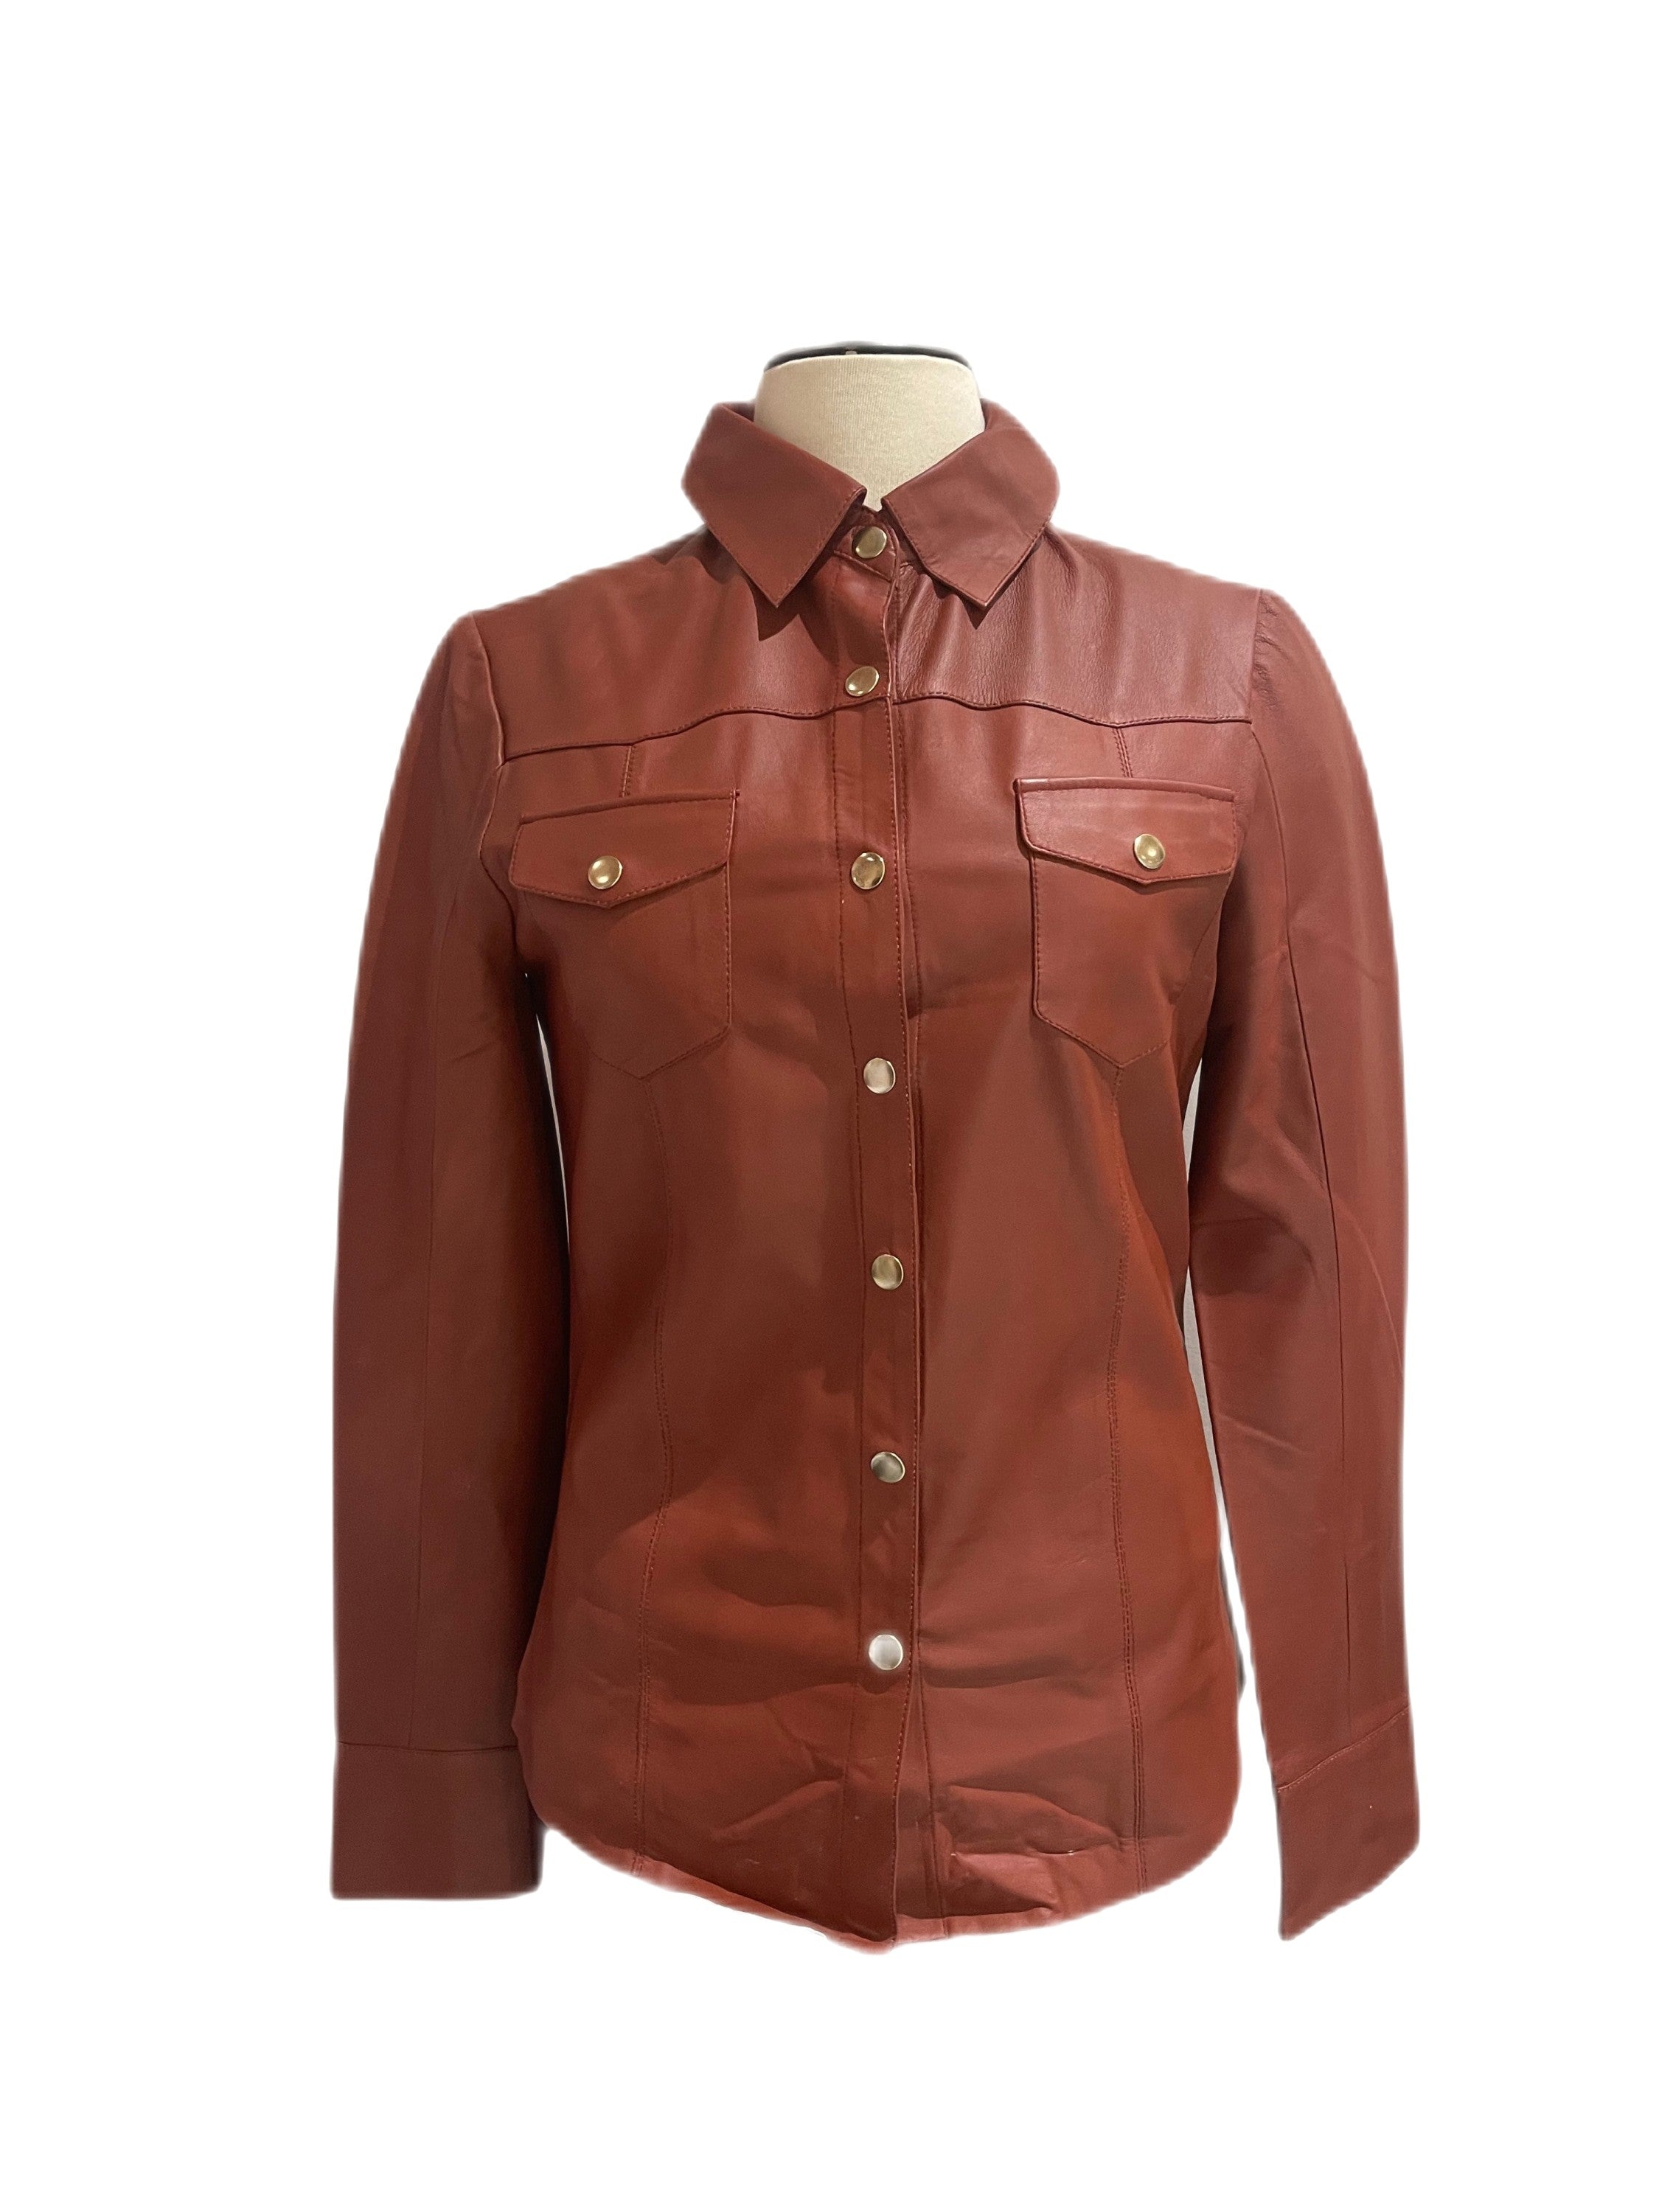 JKT Button Up in Rust Color - clever alice